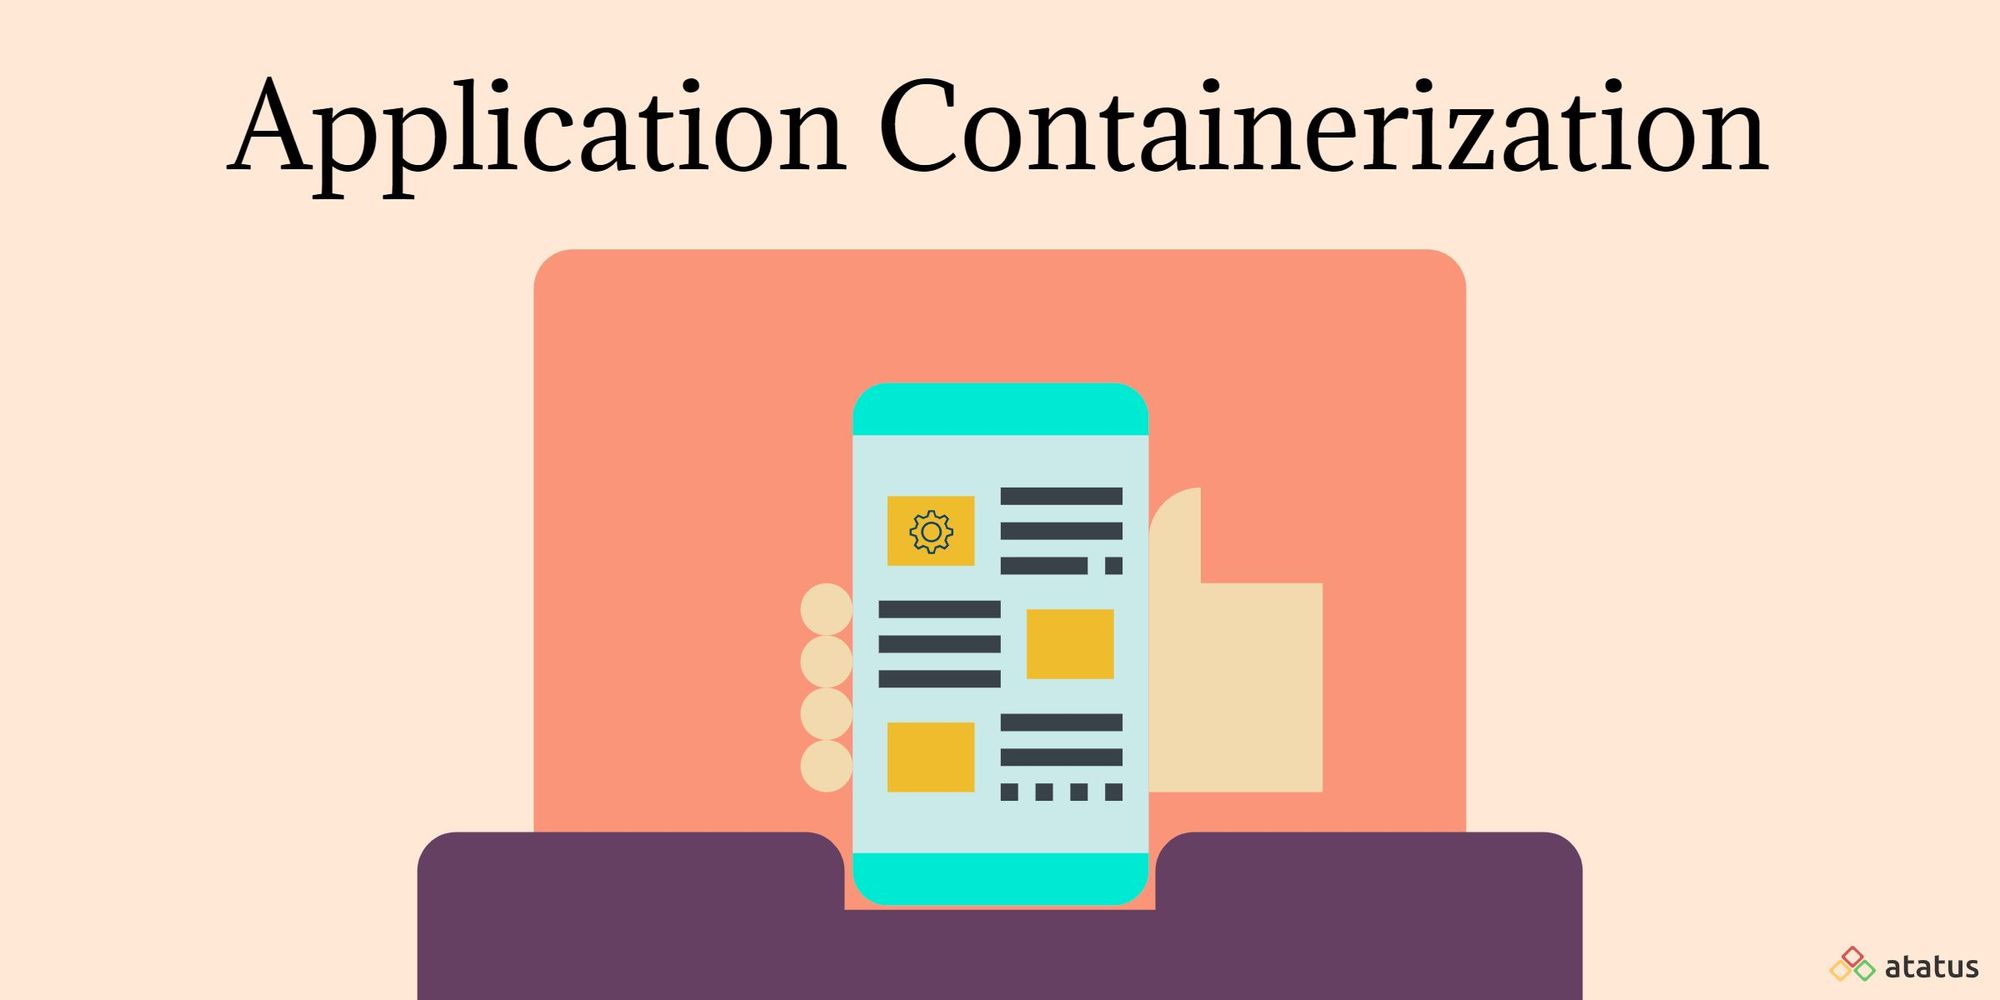 Containerization: Encapsulate applications within containers to isolate and protect them, reducing the need for code signing certificates.
Application Whitelisting: Employ application whitelisting techniques to allow only approved applications to run, eliminating the dependency on code signing certificates.